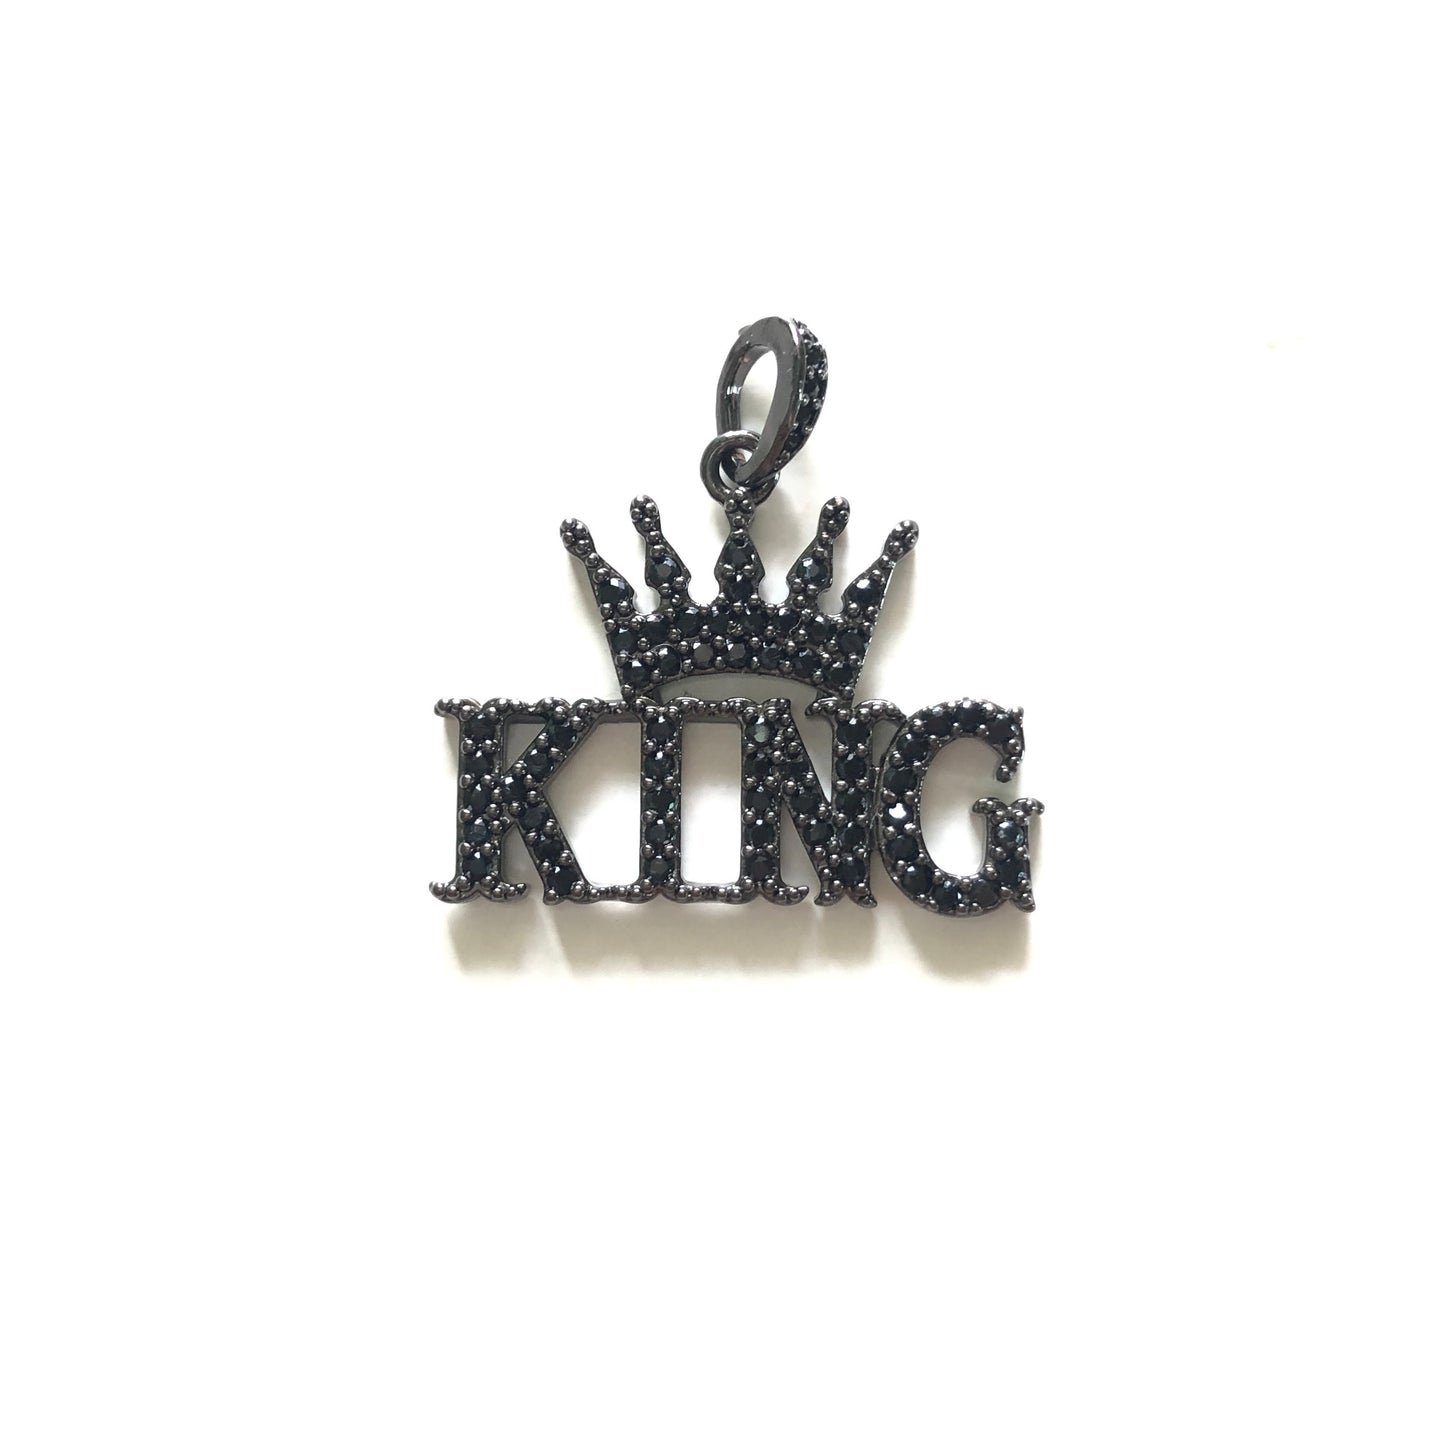 10pcs/lot 26mm*18 CZ Paved King Charms Black on Black CZ Paved Charms Words & Quotes Charms Beads Beyond